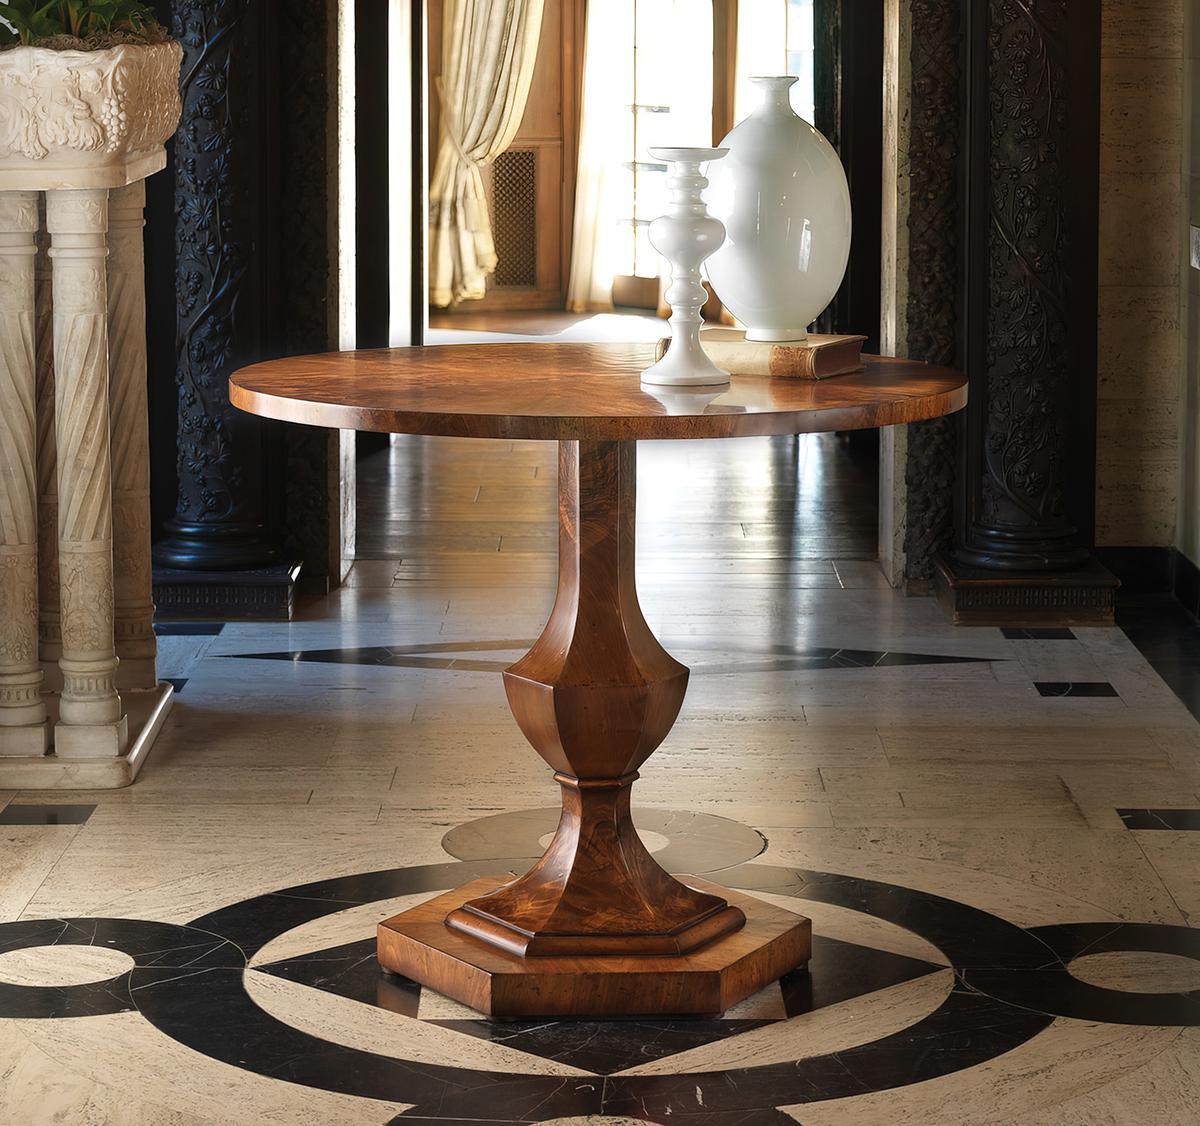 Biedermeier Walnut Table with a warm amber brown walnut finish, the rayed and figured top above a single central hexagonal baluster pedestal base.

Dimensions: 36